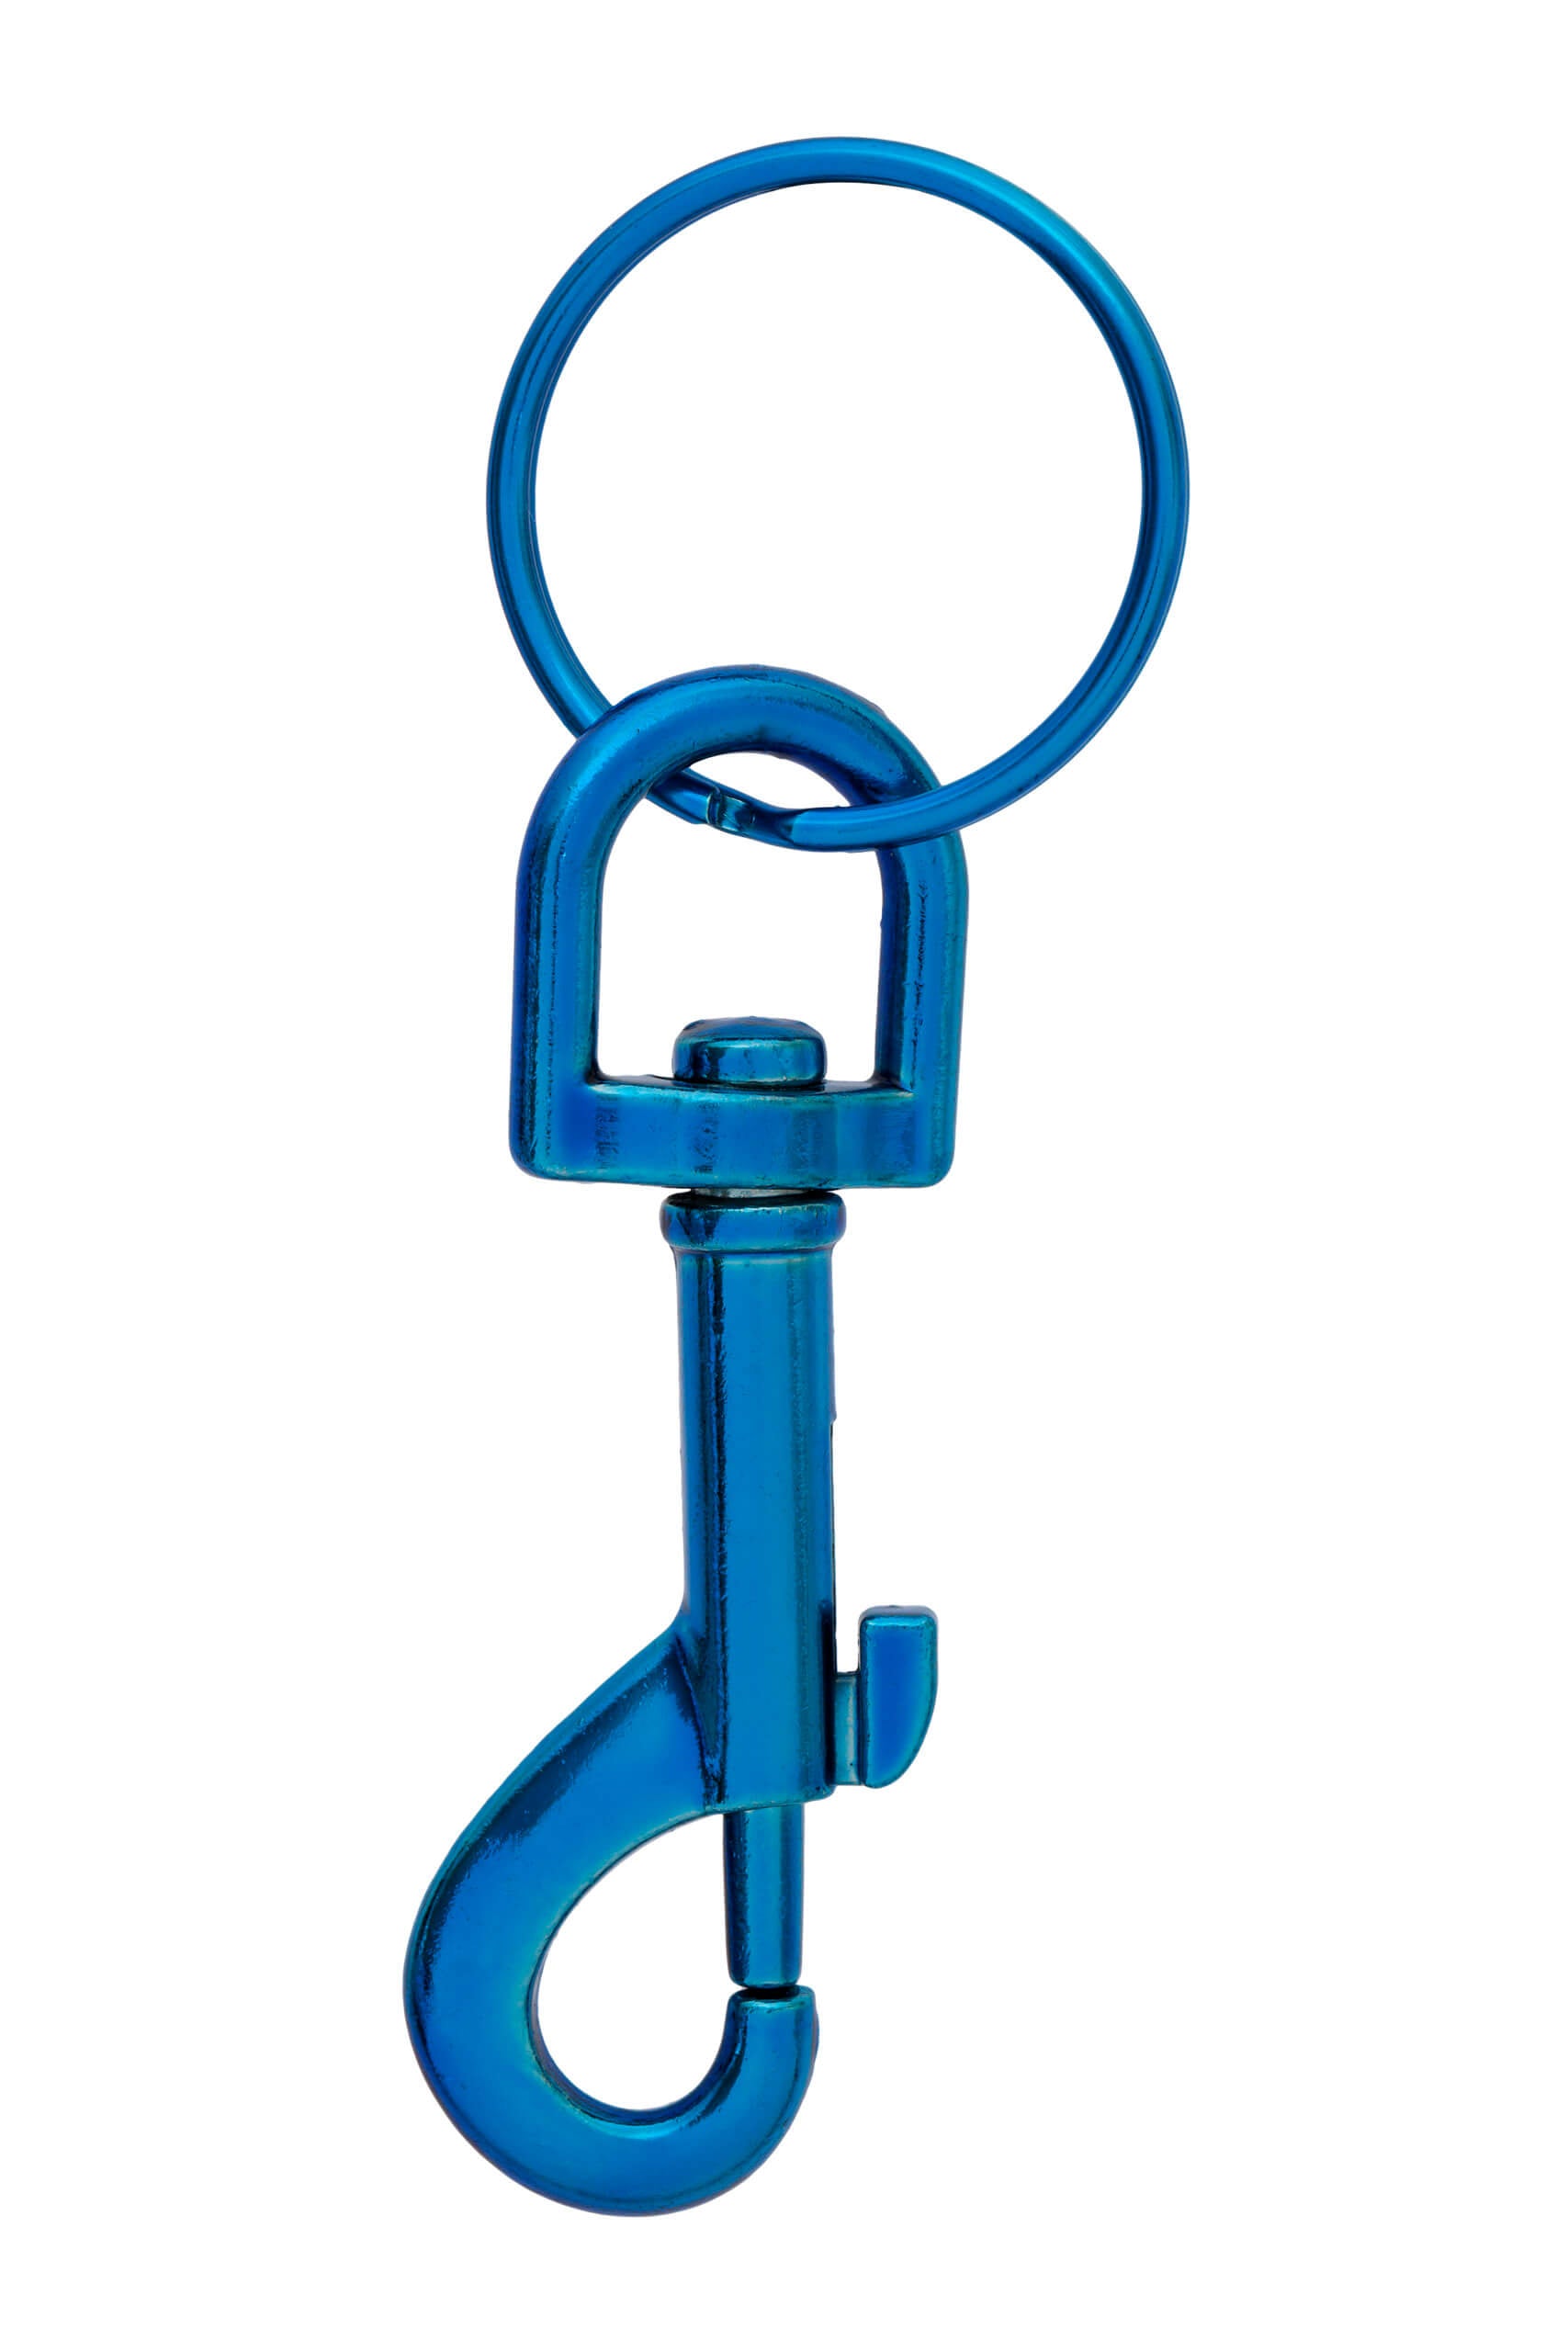 Jeans Clasp Anodised Key Ring Accessory Blue - Mister Minit